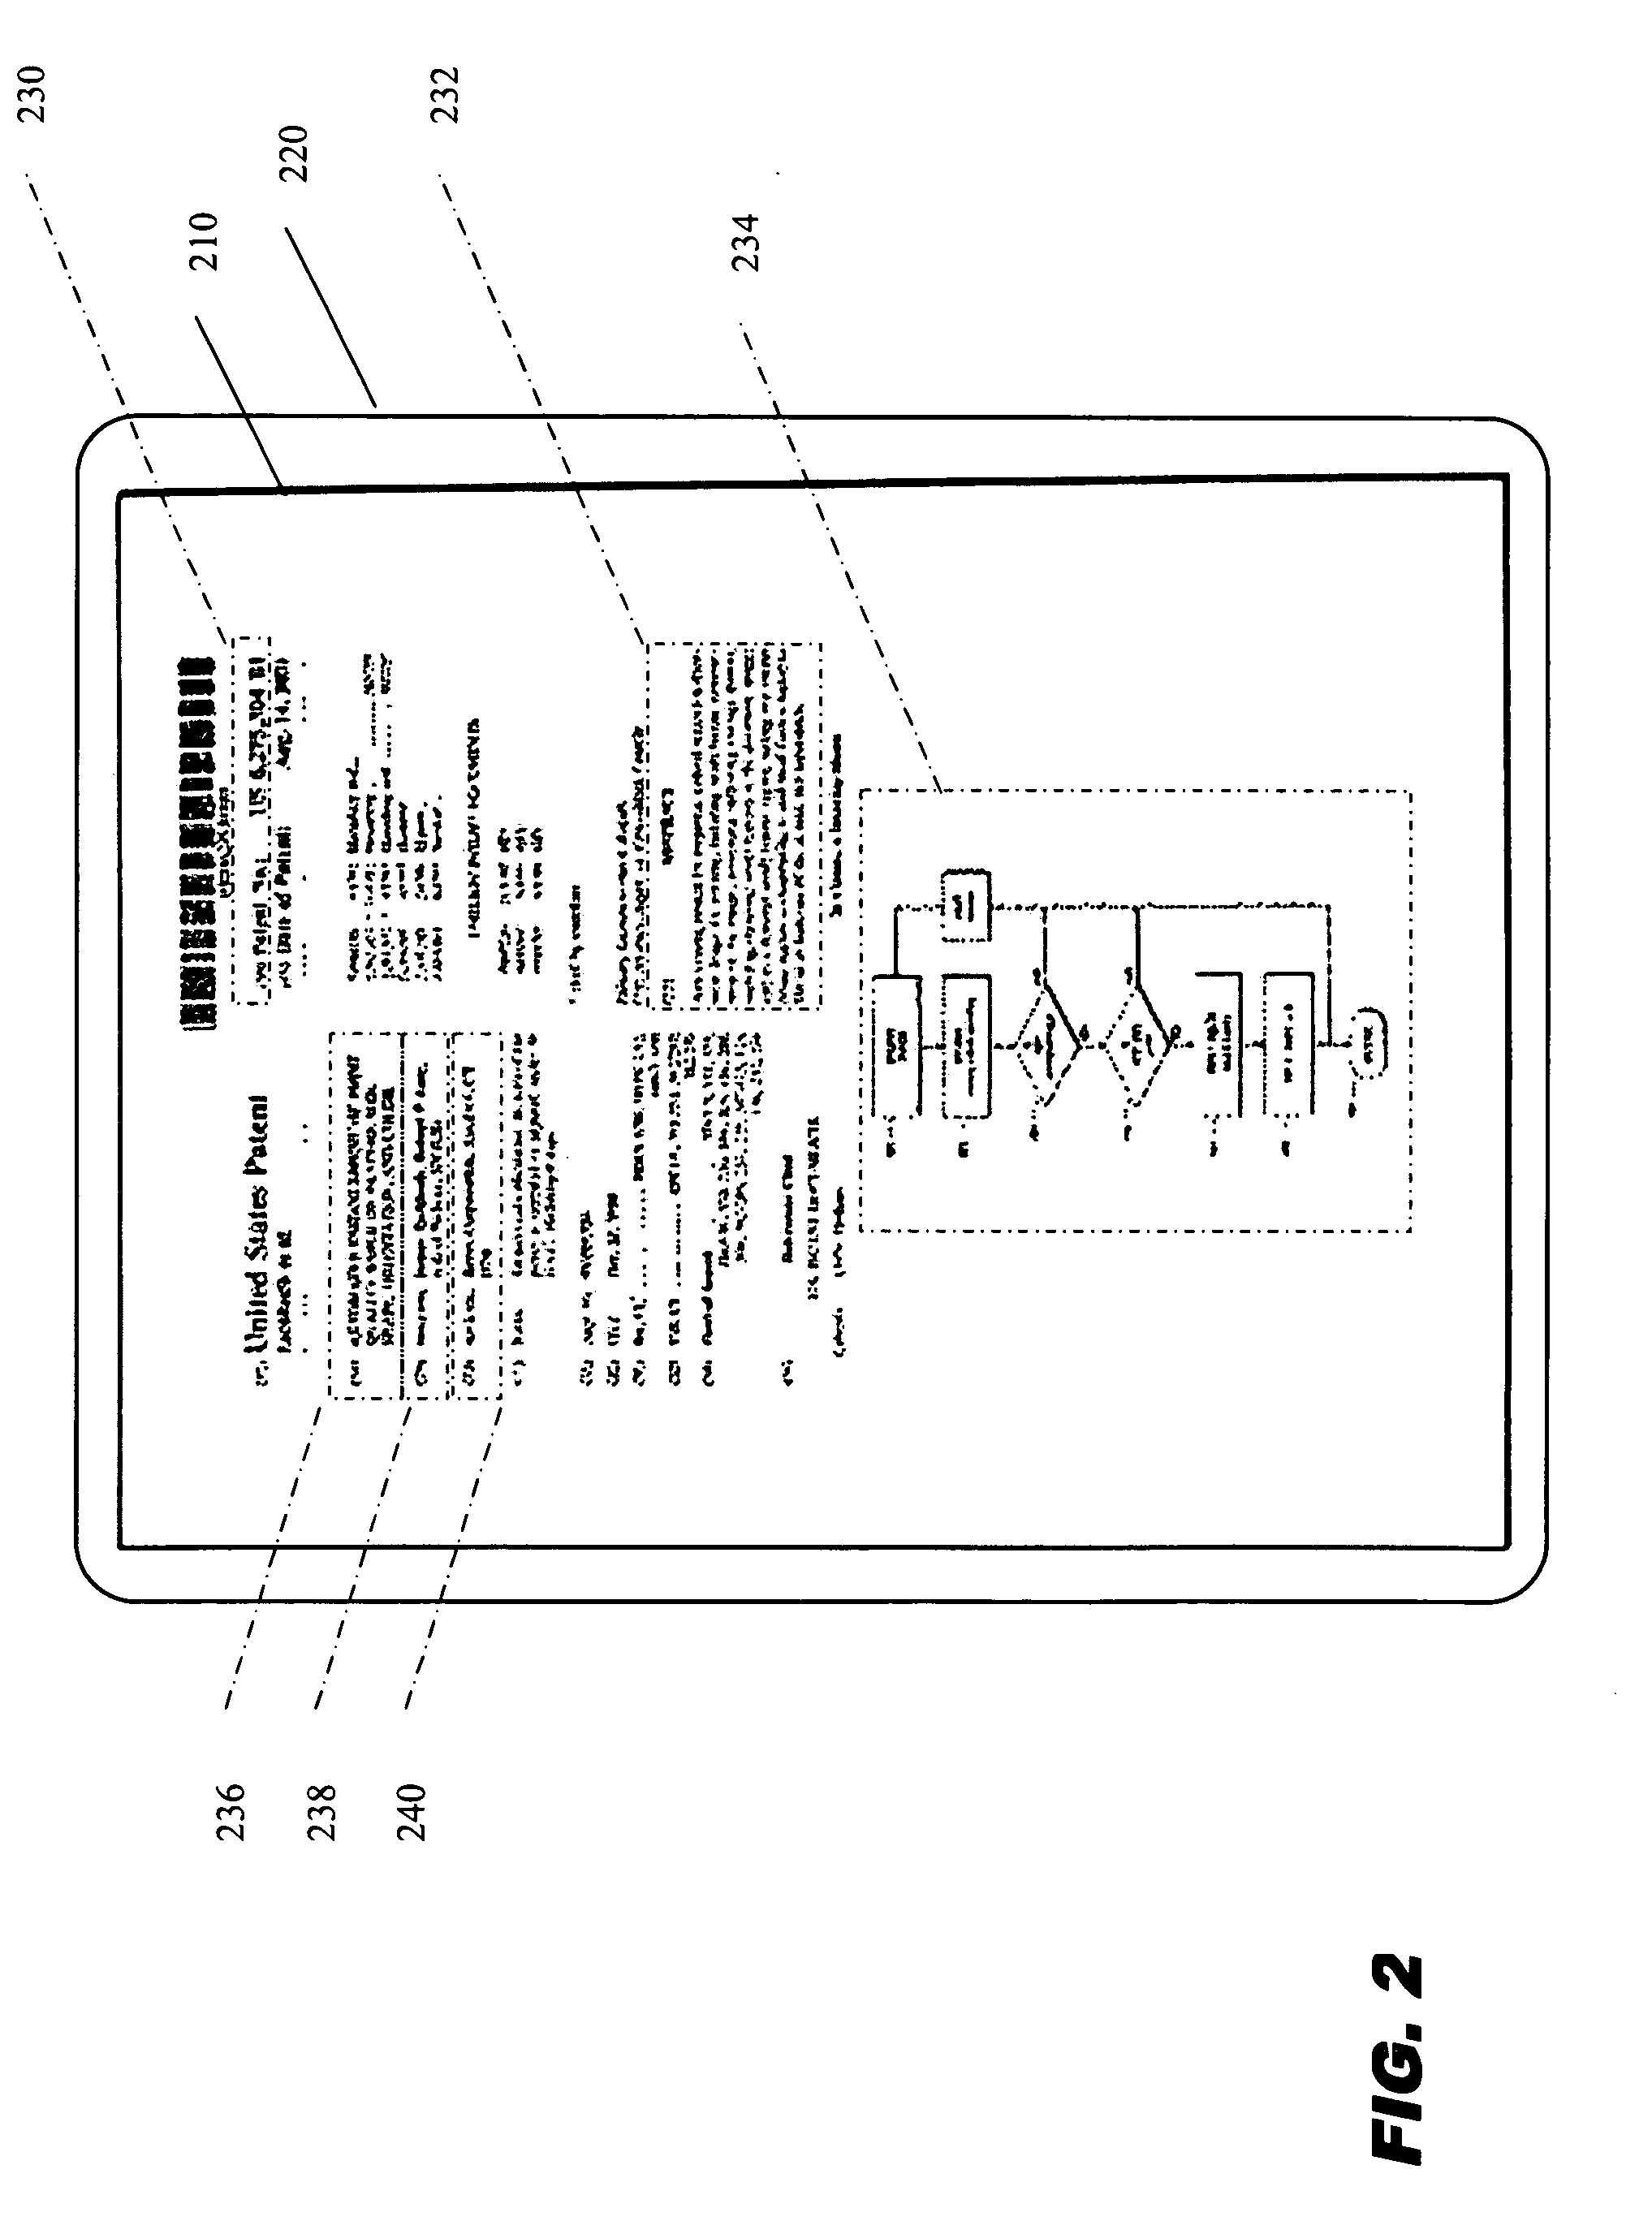 System and method for dynamic zoom to view documents on small displays